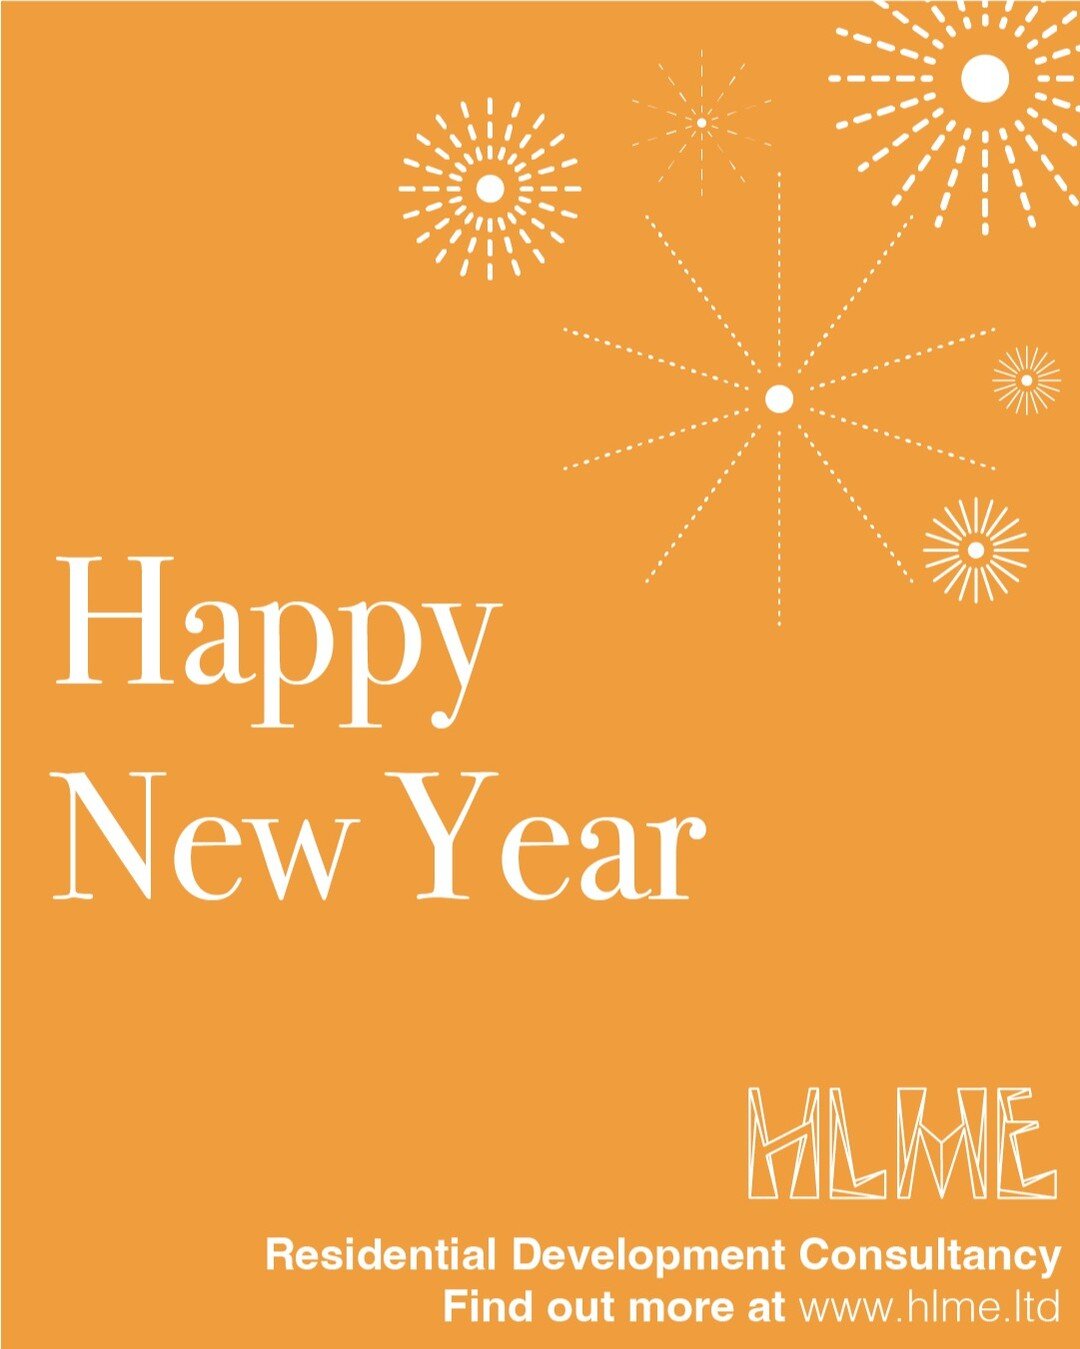 Happy New Year and thank you for your support during our first year. #HLME #HLMELoves #placemaking #housing #residentialdevelopment